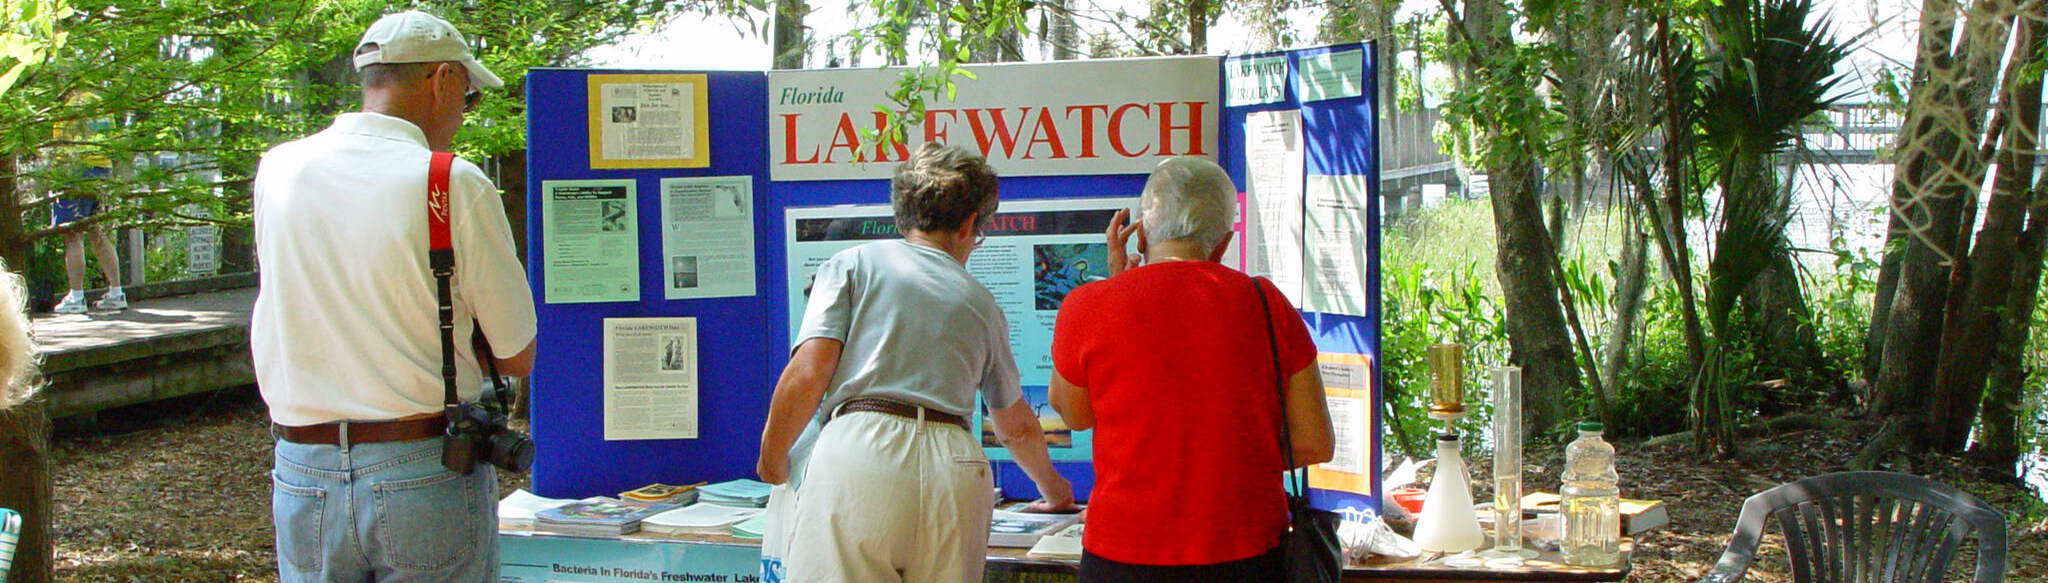 photo of people looking at a Lakewatch booth at a community event